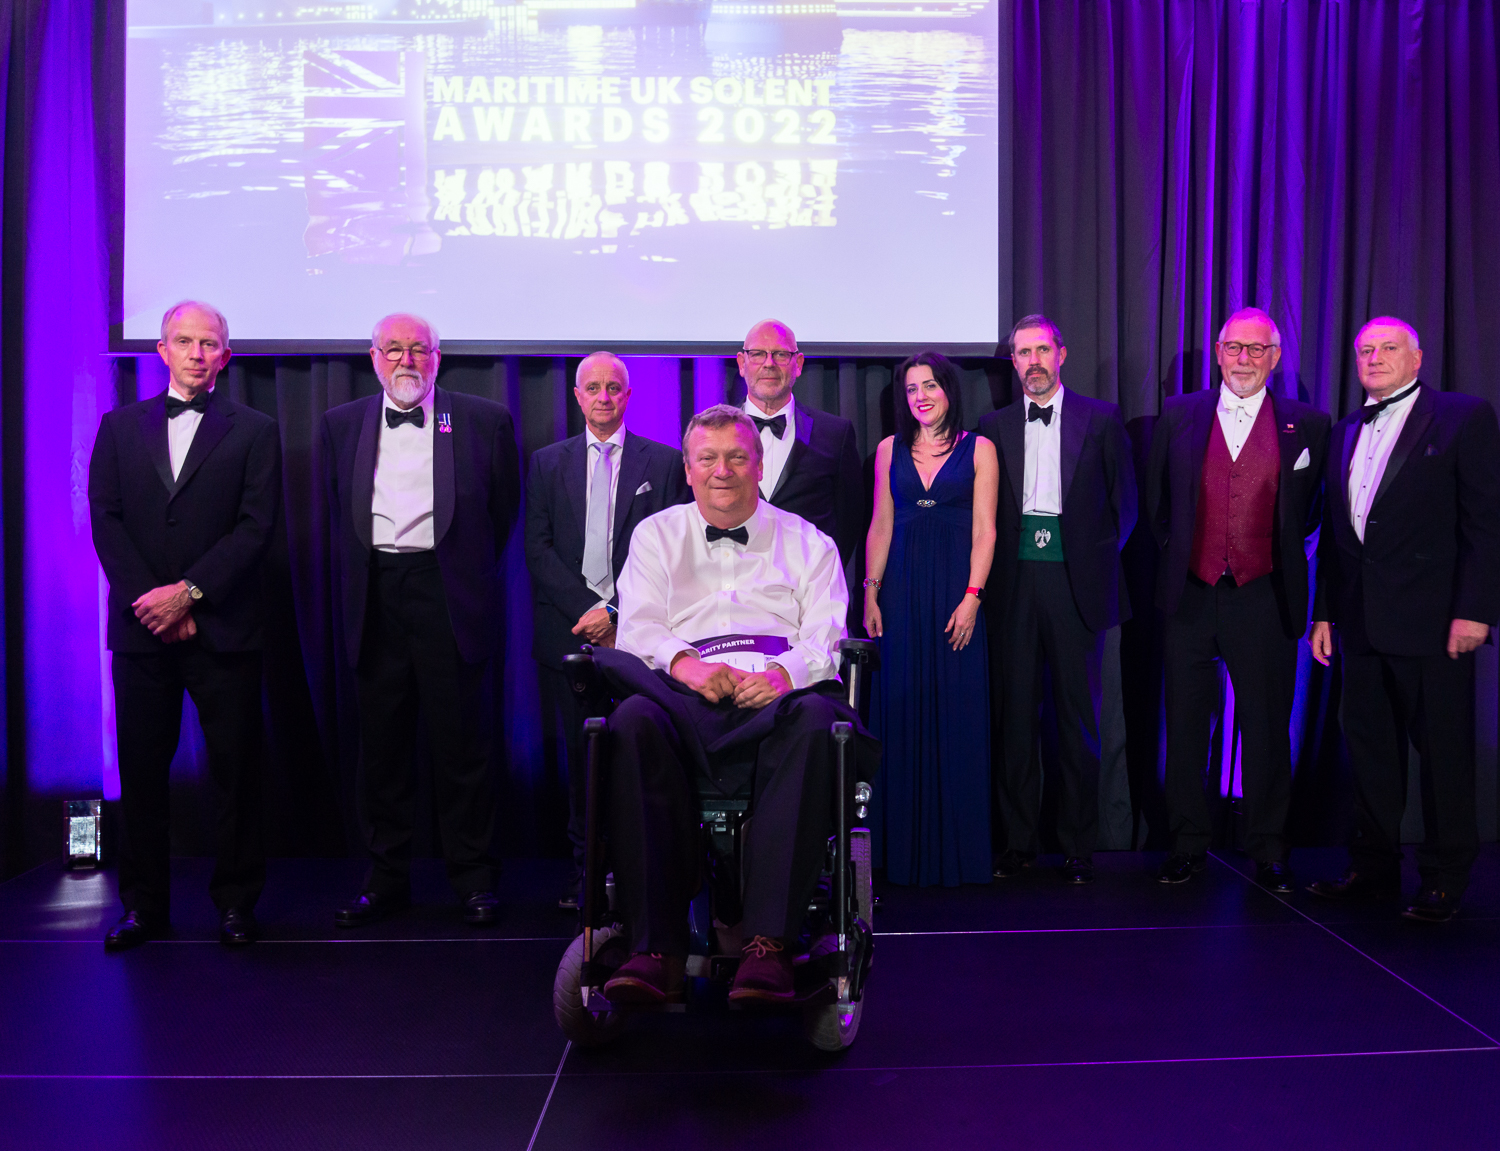 A photo of Maritime UK Solent Awards 2022 Maritime Hero nominees on stage with a purple curtain in the background and a tv screen showing the awards logo image